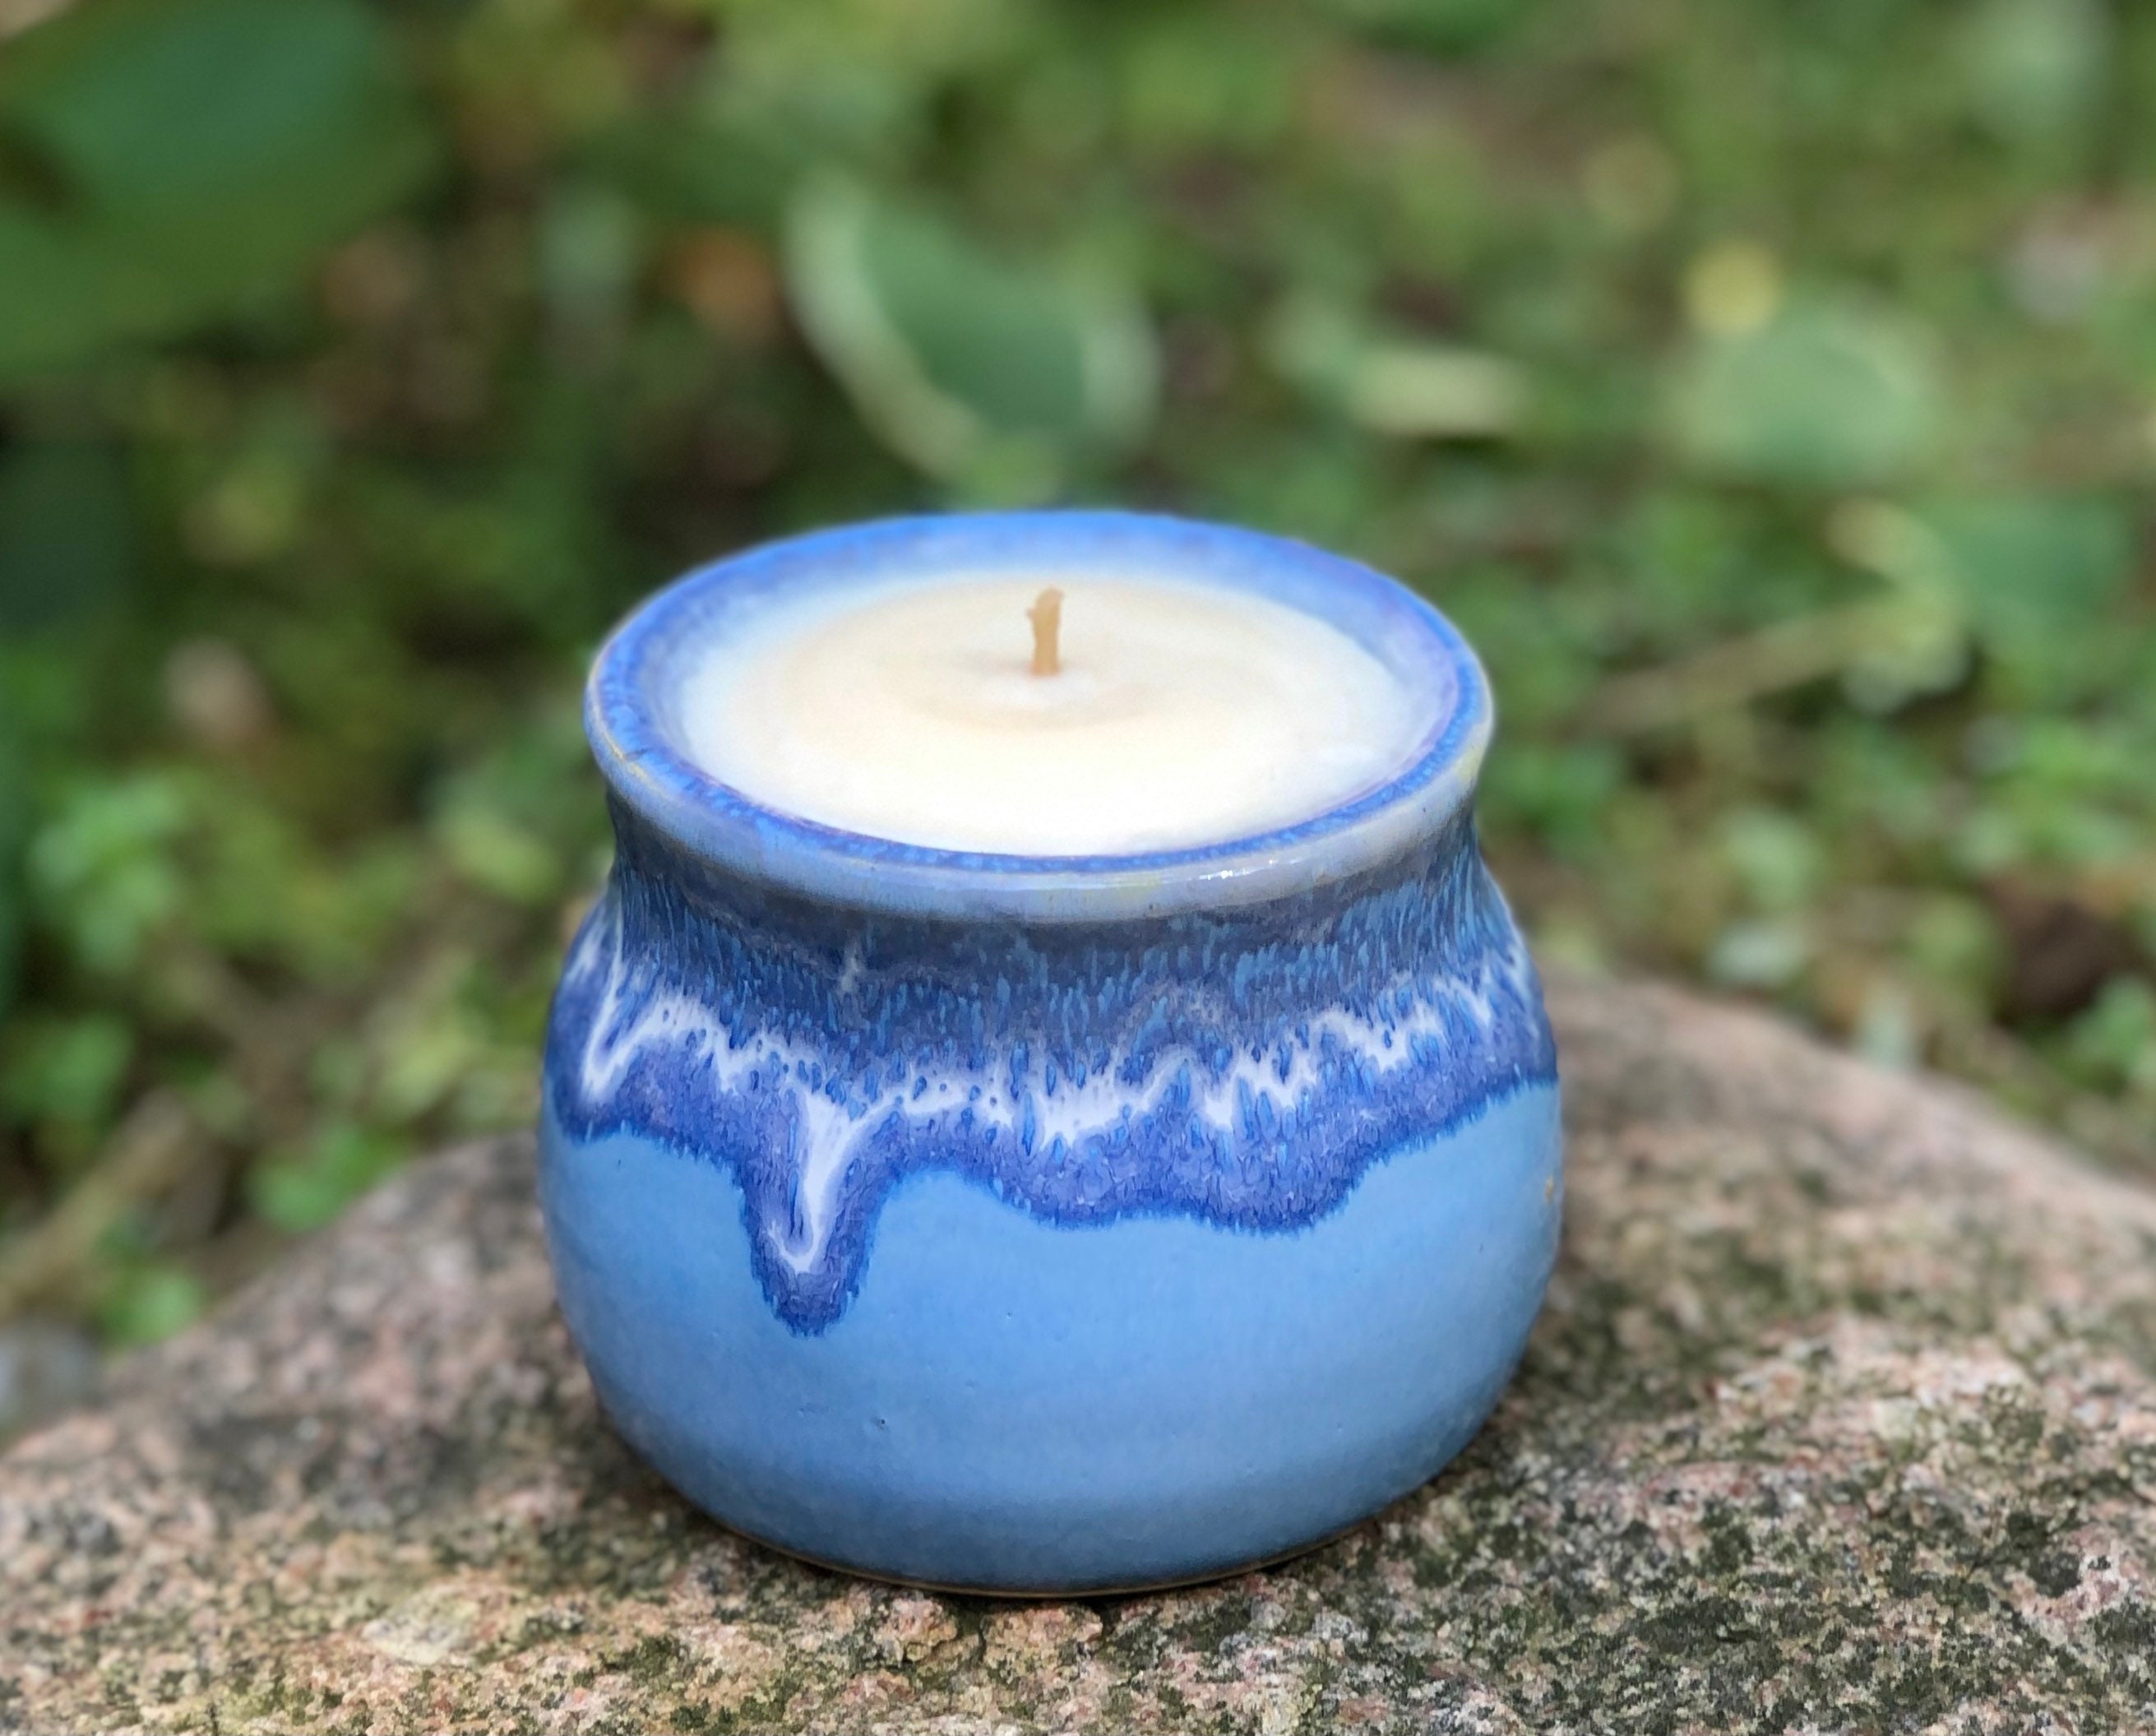 Soy Candle in Handmade Pottery, Vanilla Scented, Eco-friendly Stoneware Ceramic  Candle, Blue Home Decor, Soy Wax Candle in a Jar, Under 30 